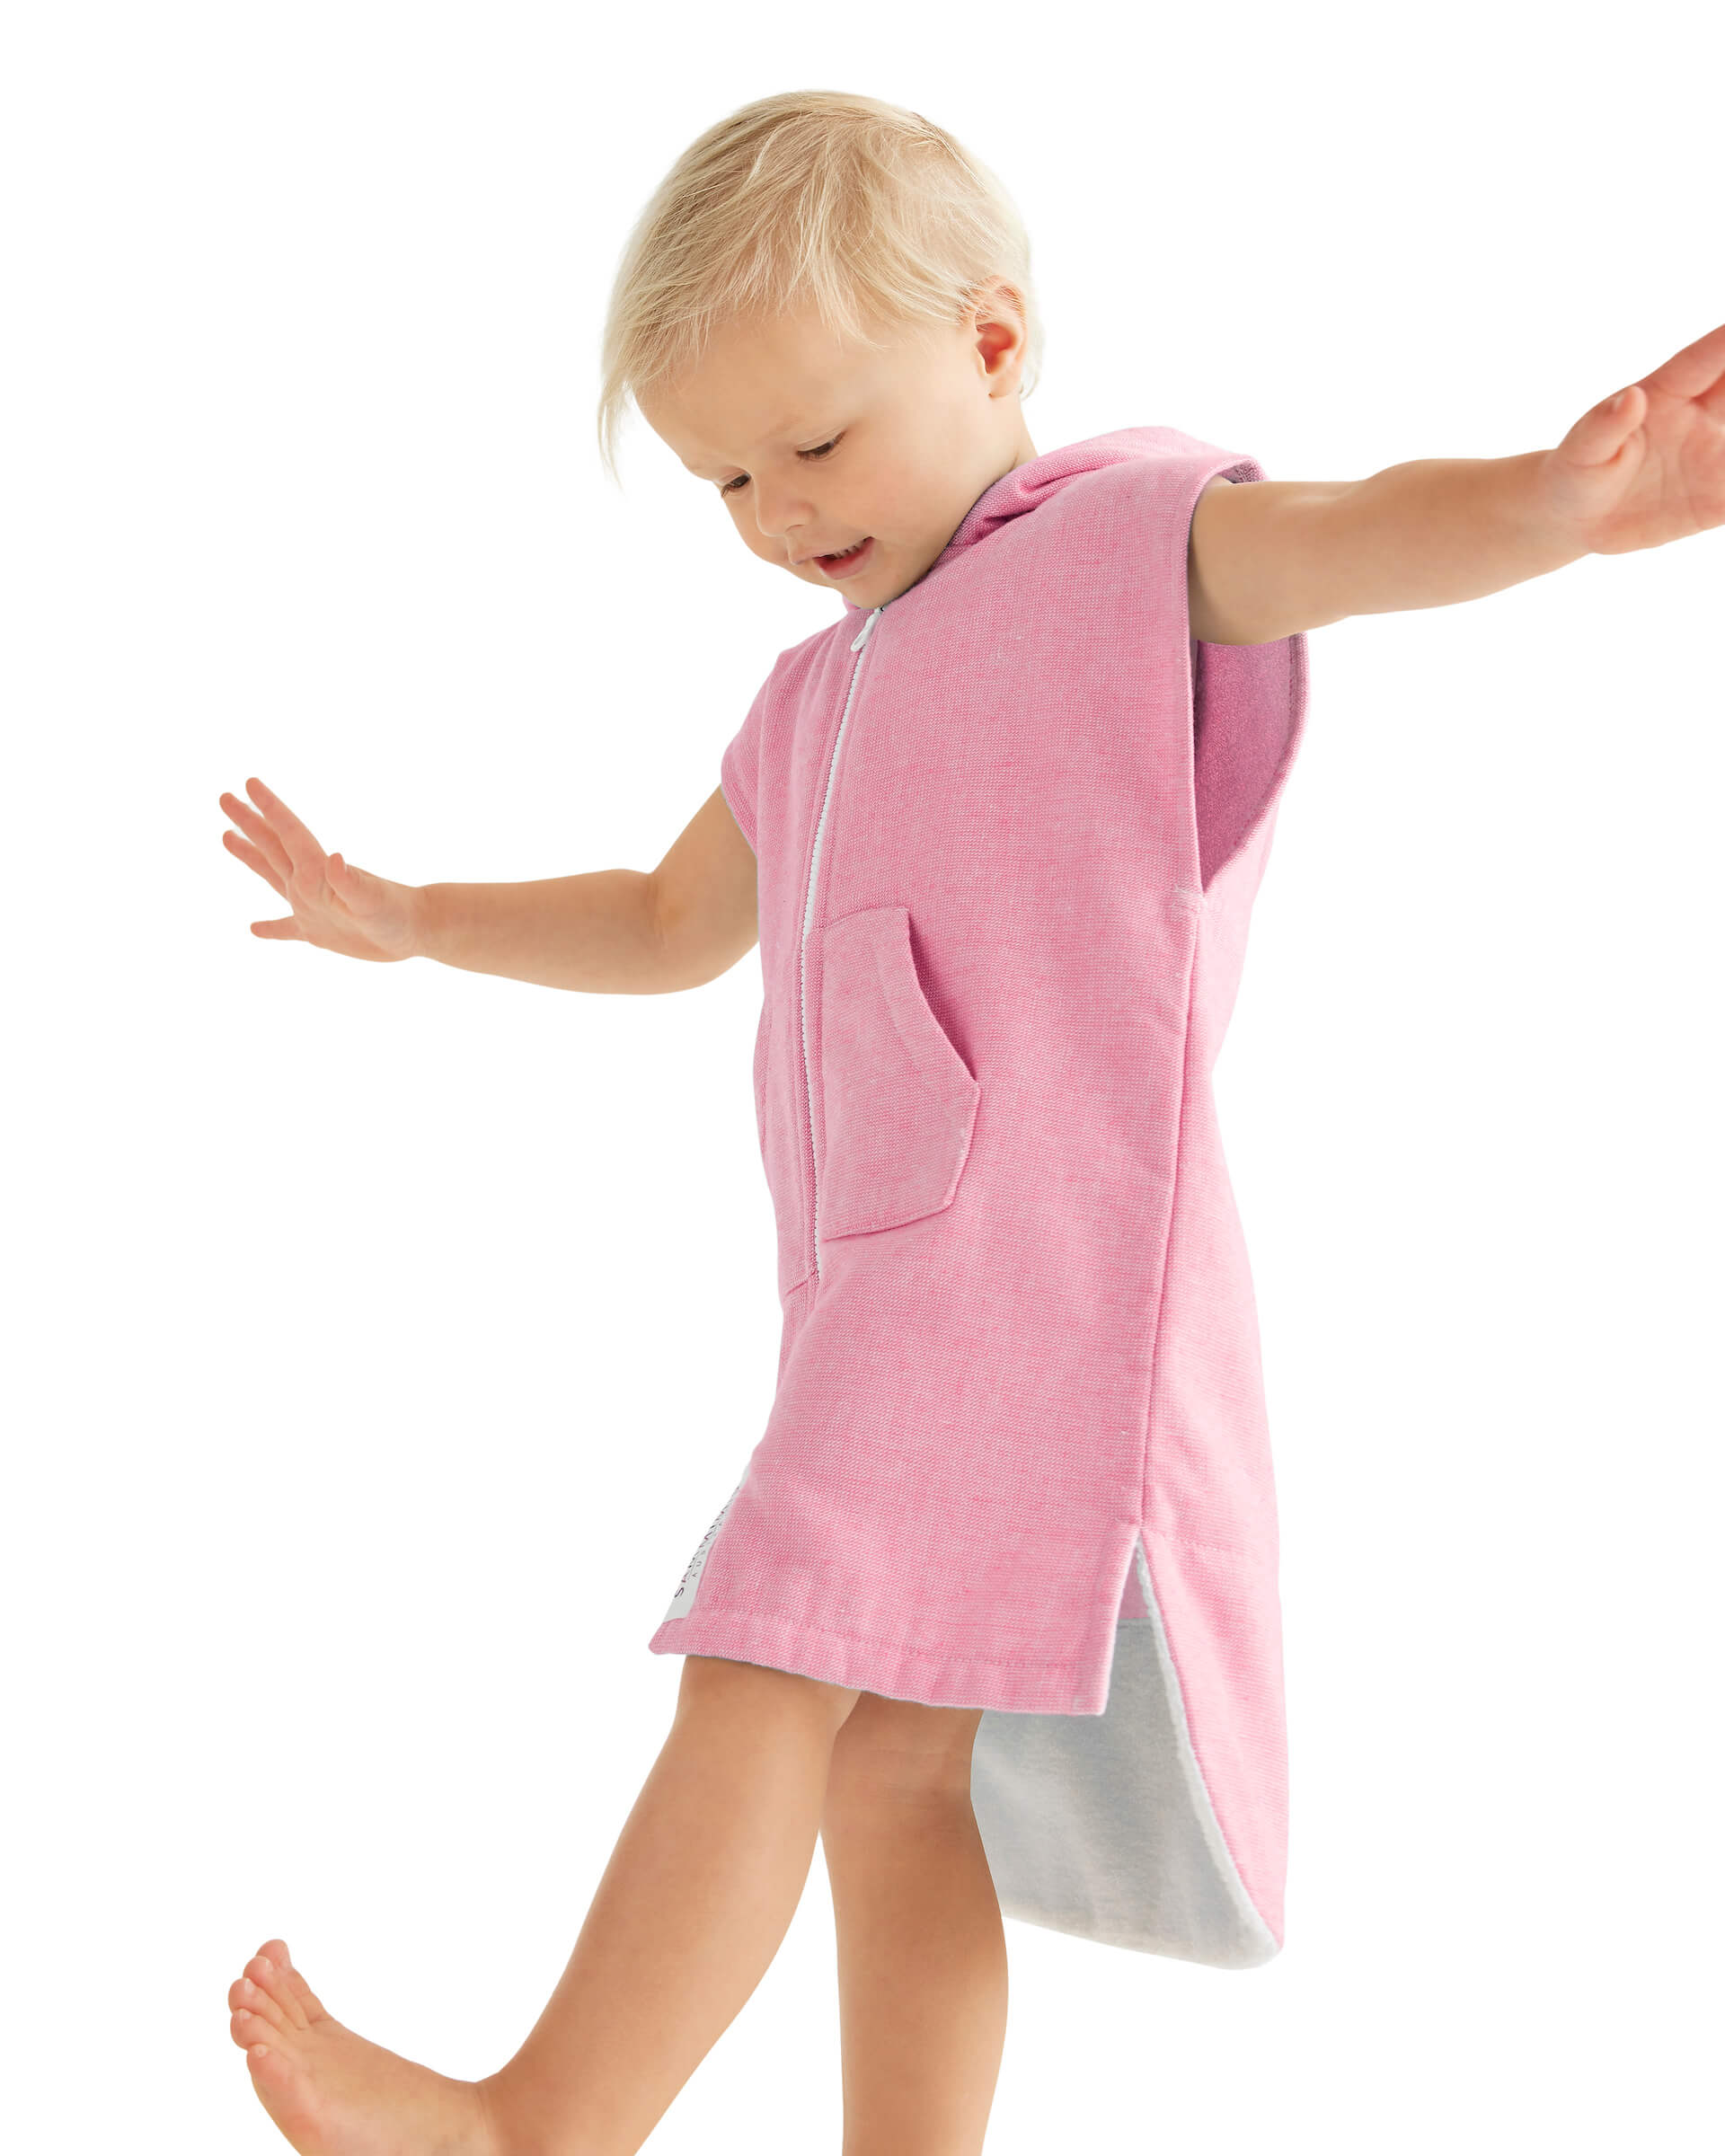 MONTEROSSO Baby Sleeveless Terry Hooded Towel:  Pink